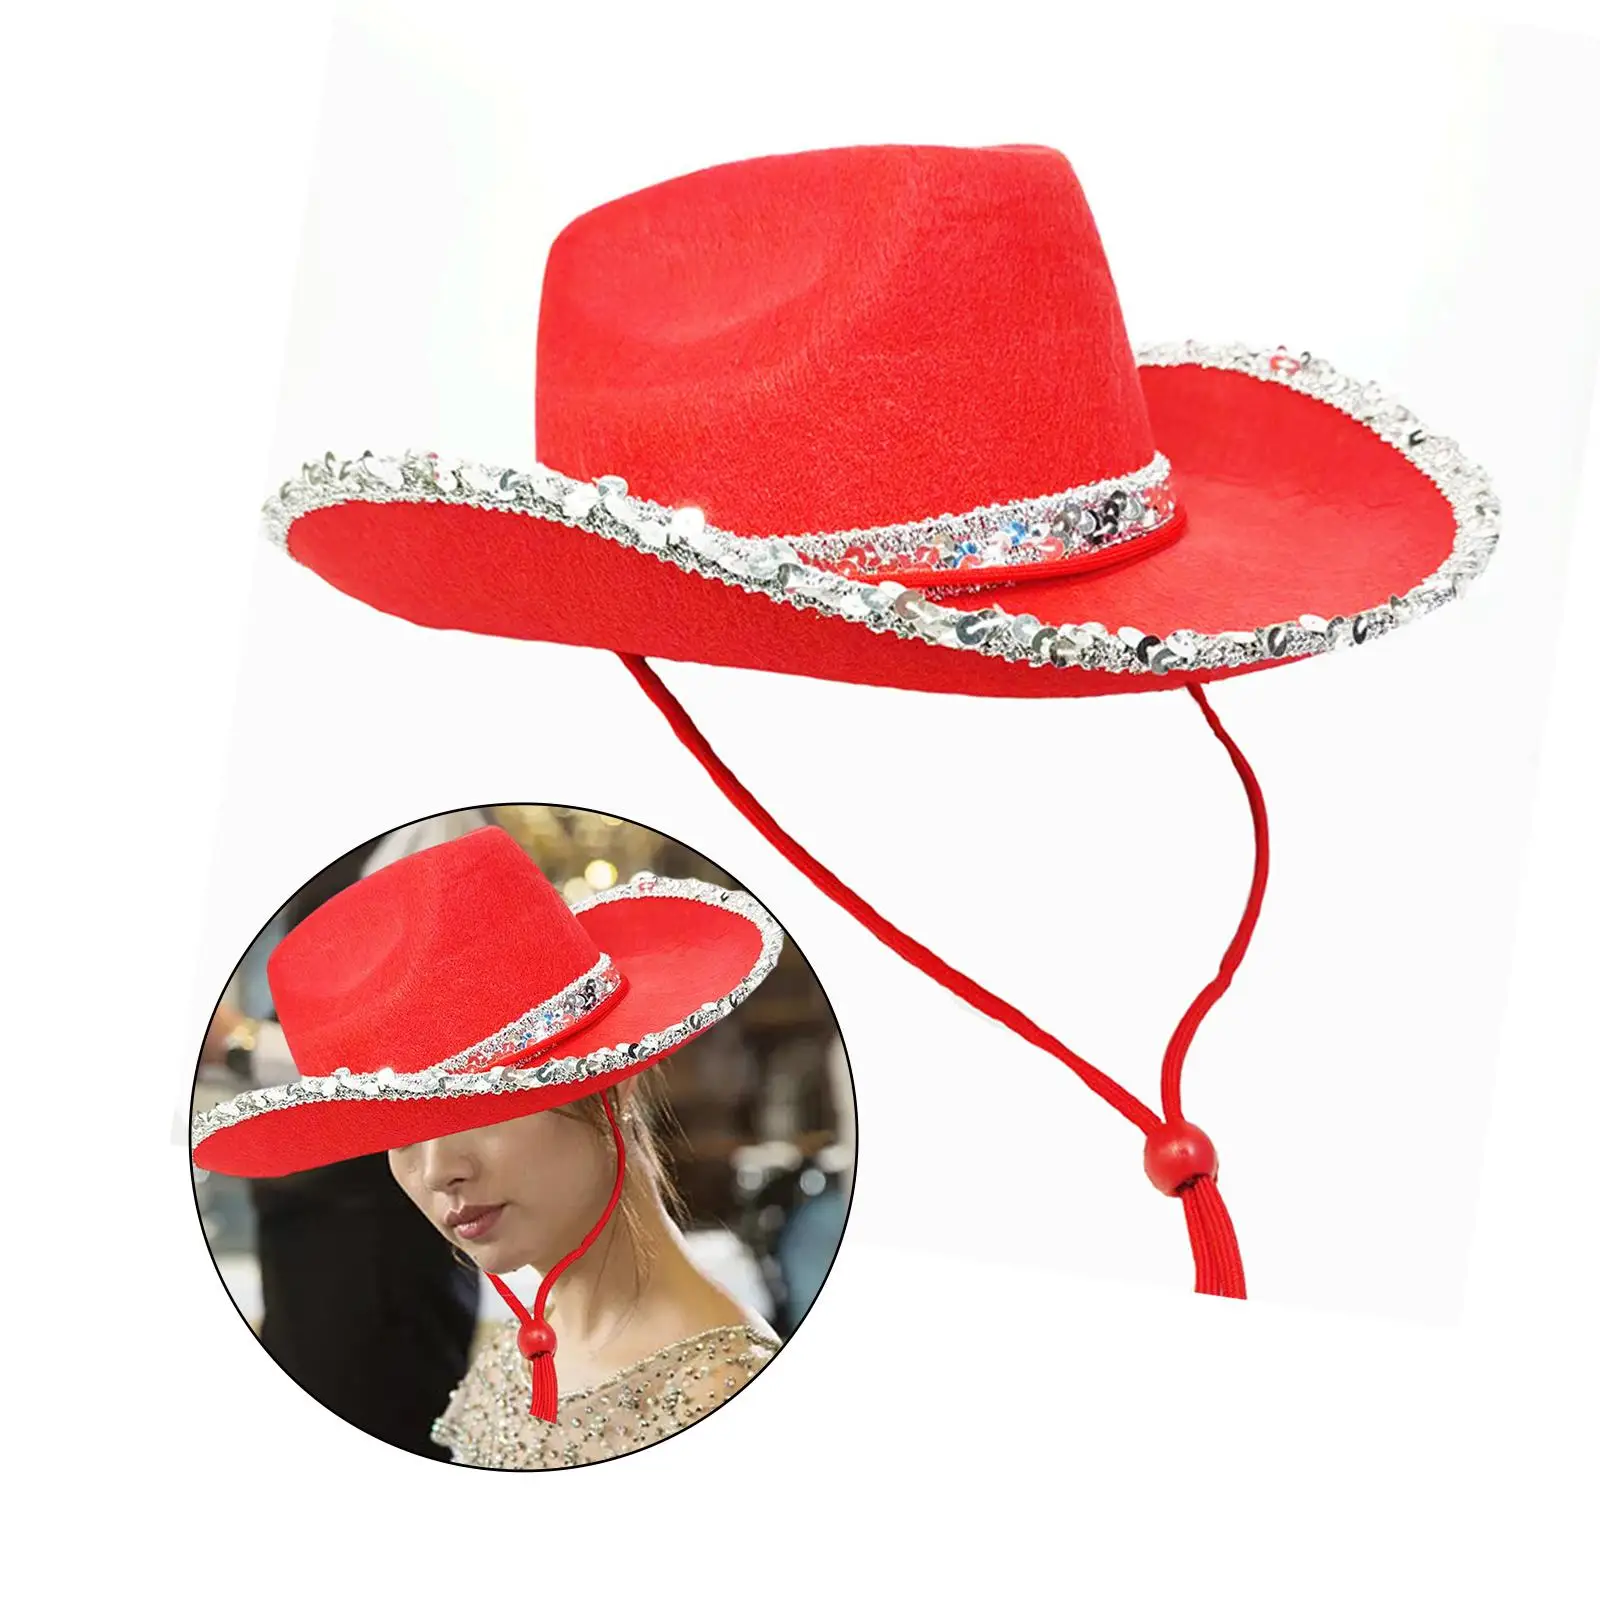 Western Cowboy Hat Fedoras Caps Fashion Sunhat Cowgirl Hat for Music Concerts Wedding Bridal Shower Role Play Fancy Dress